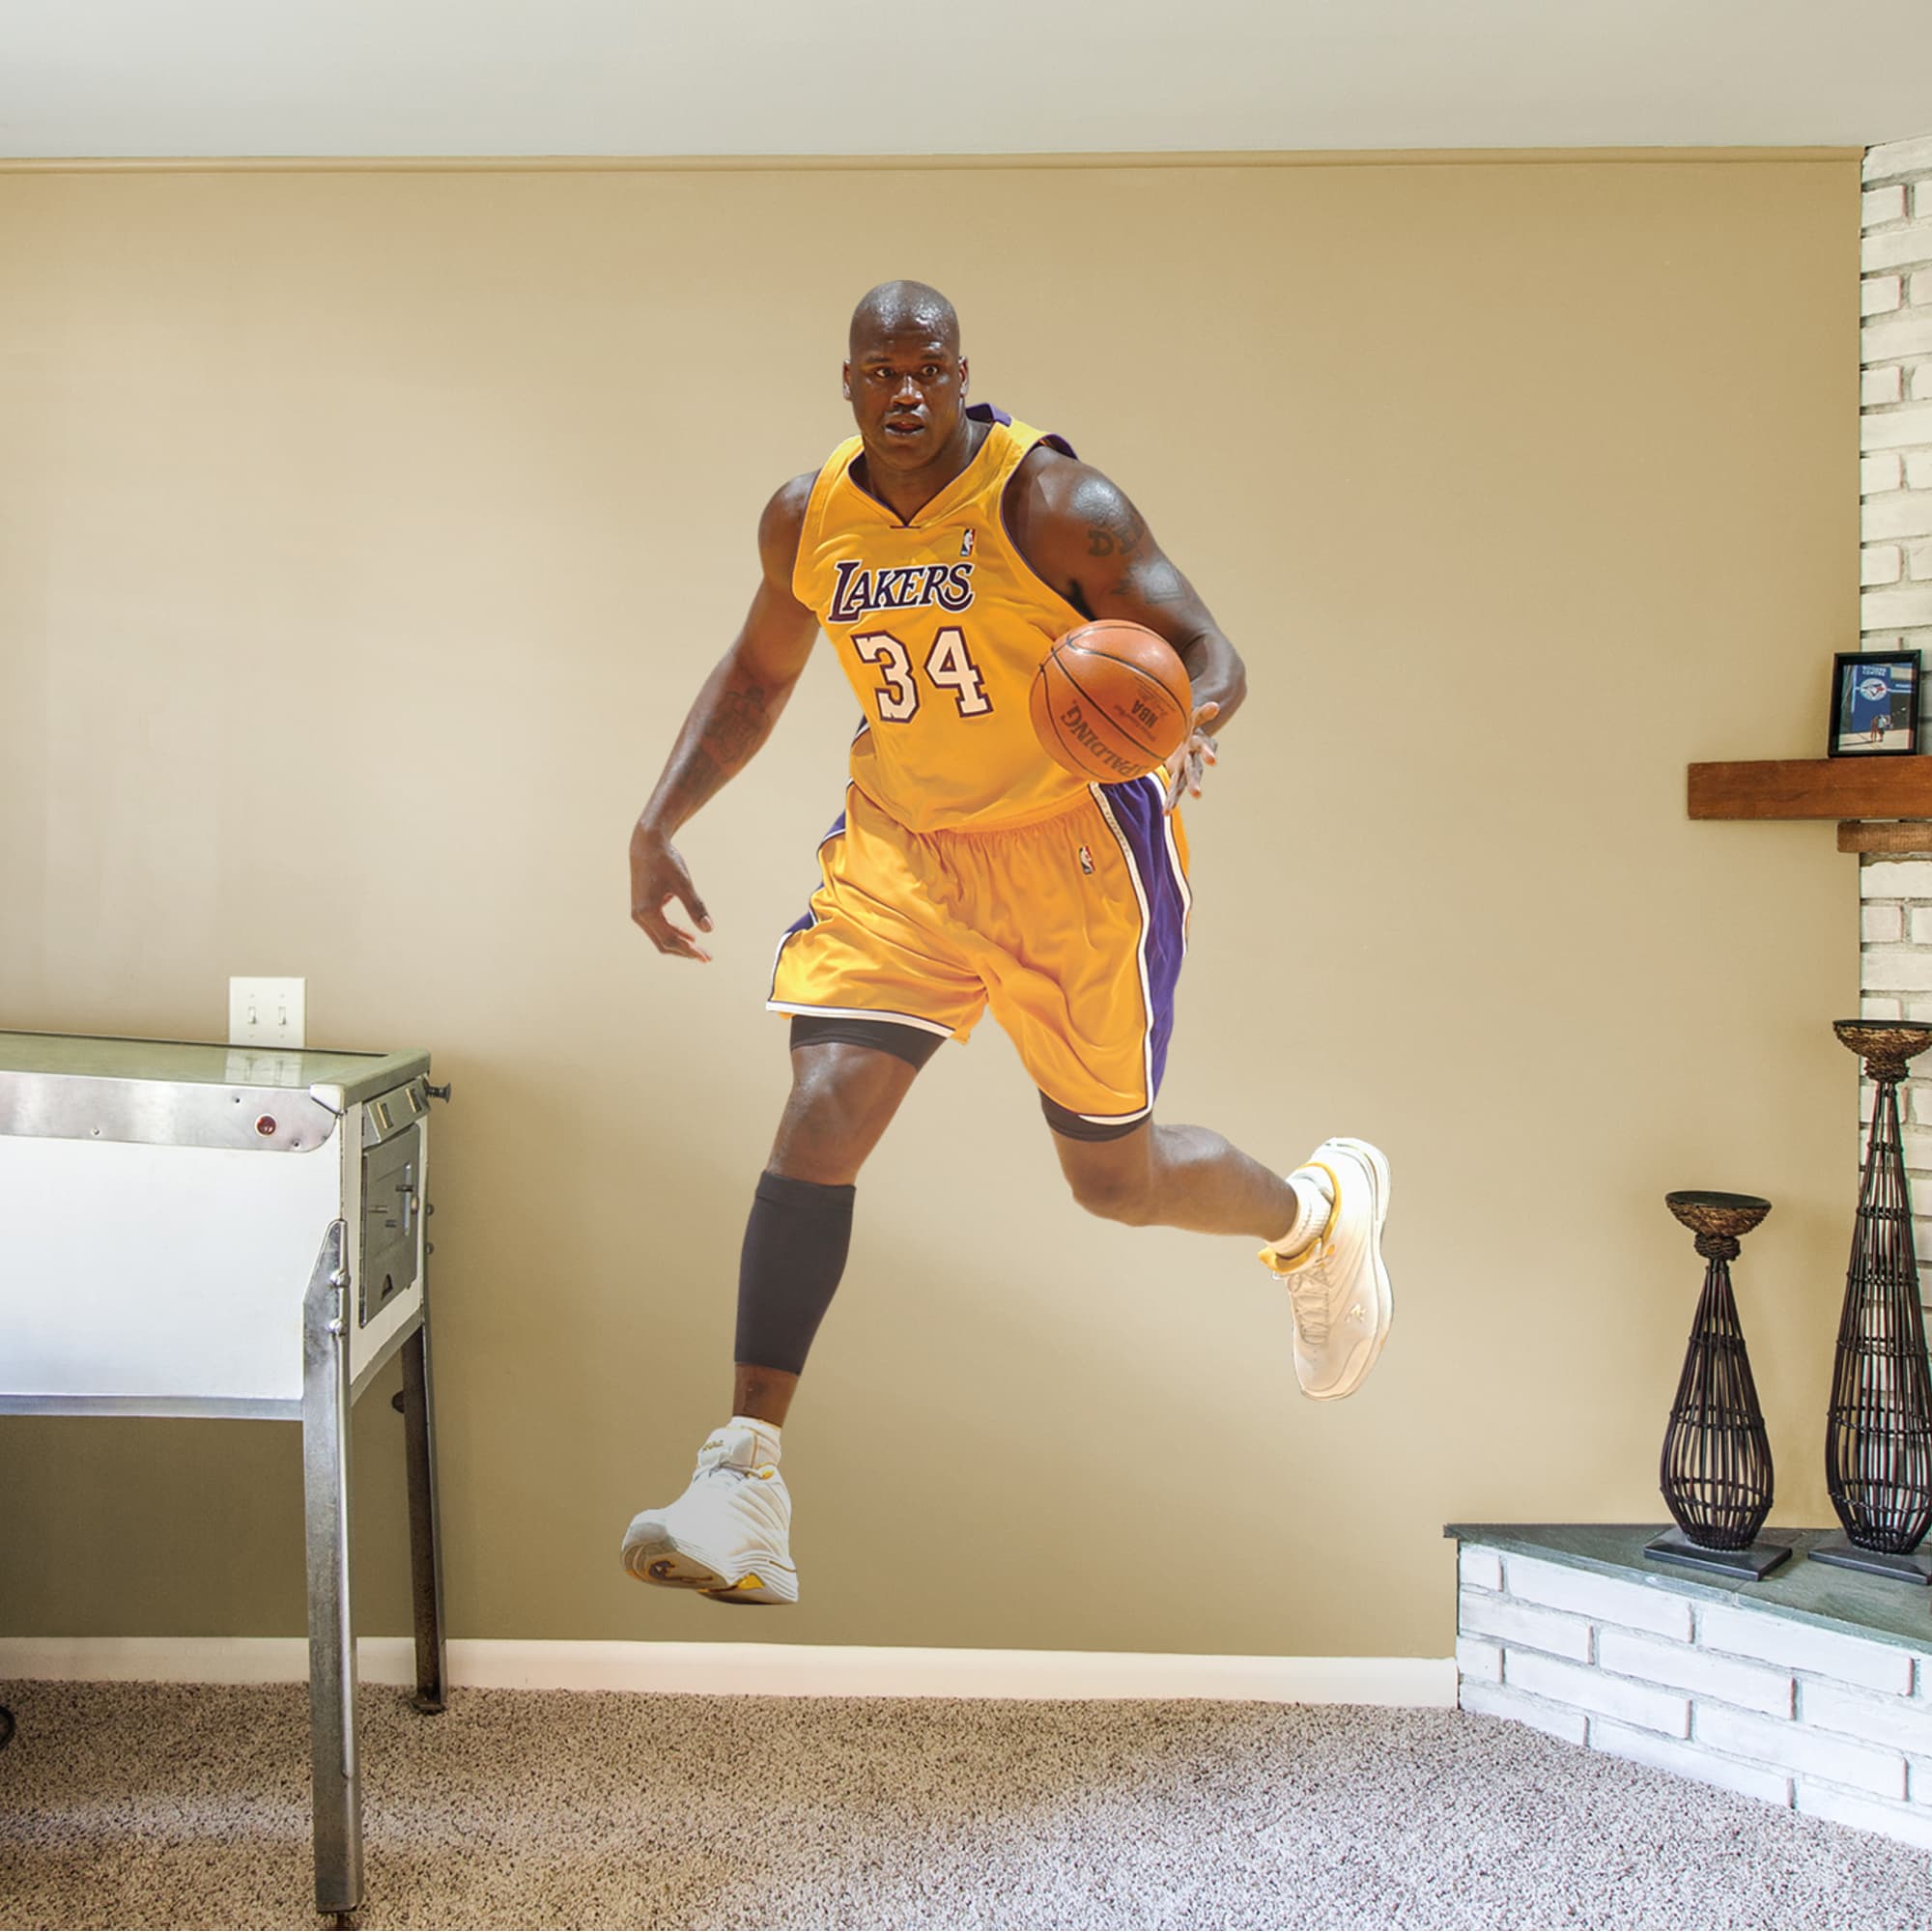 Shaquille ONeal for Los Angeles Lakers - Officially Licensed NBA Removable Wall Decal Life-Size Athlete + 12 Decals (50"W x 86"